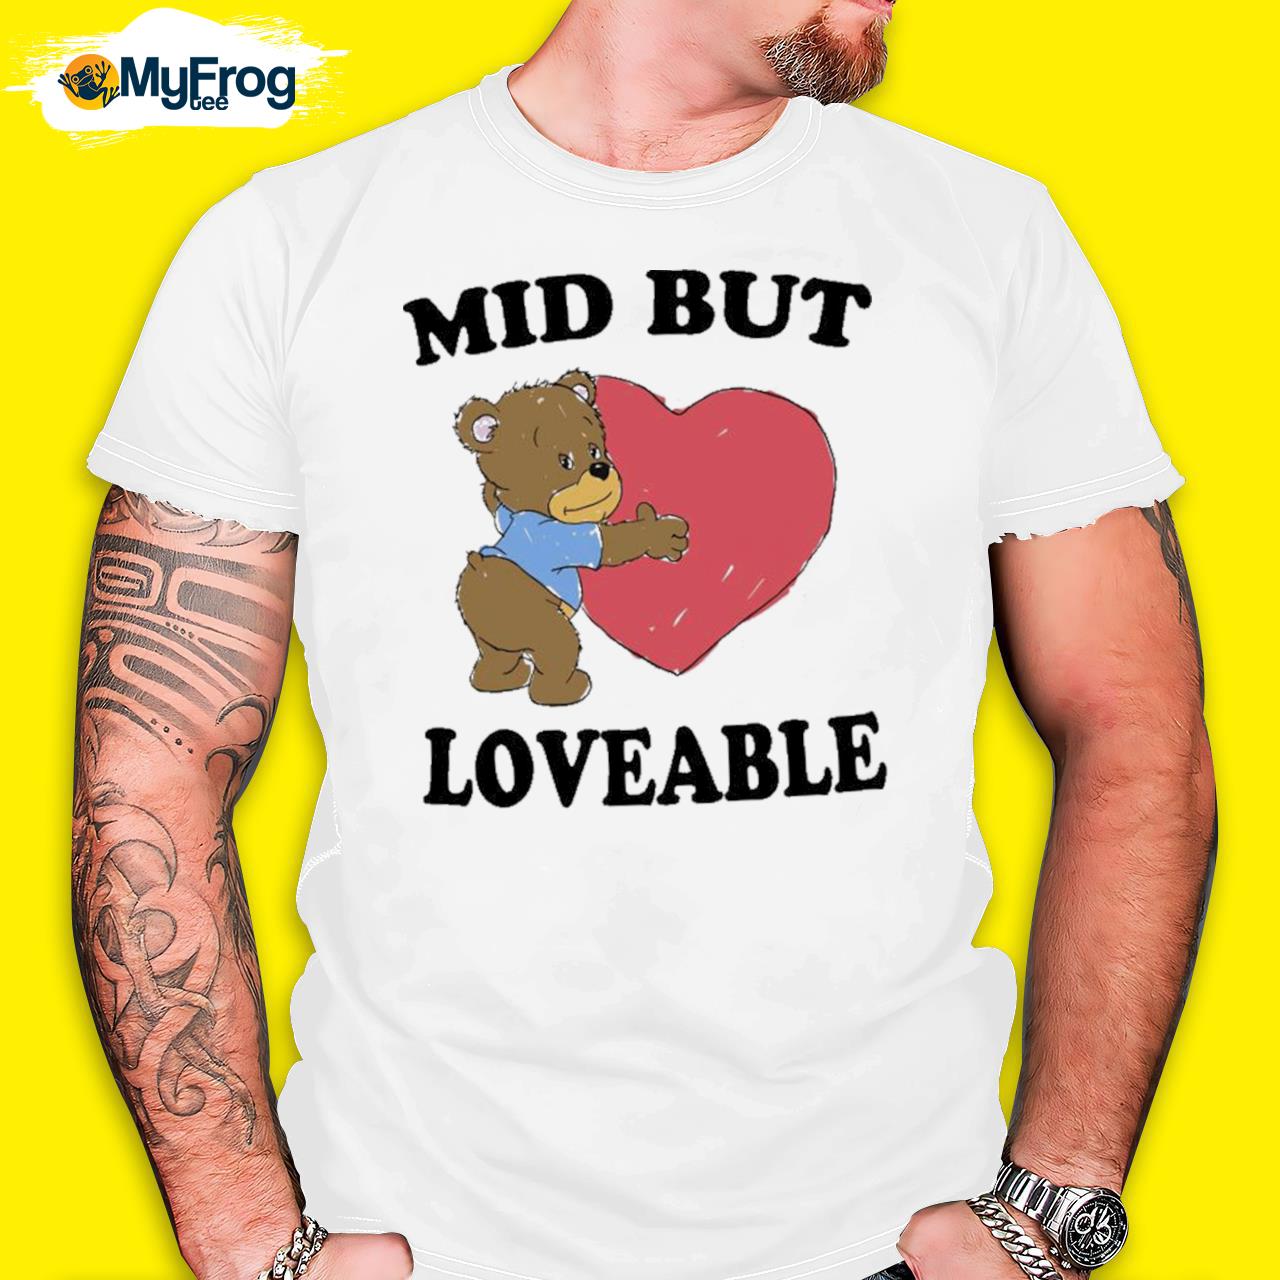 That go hard mid but loveables shirt